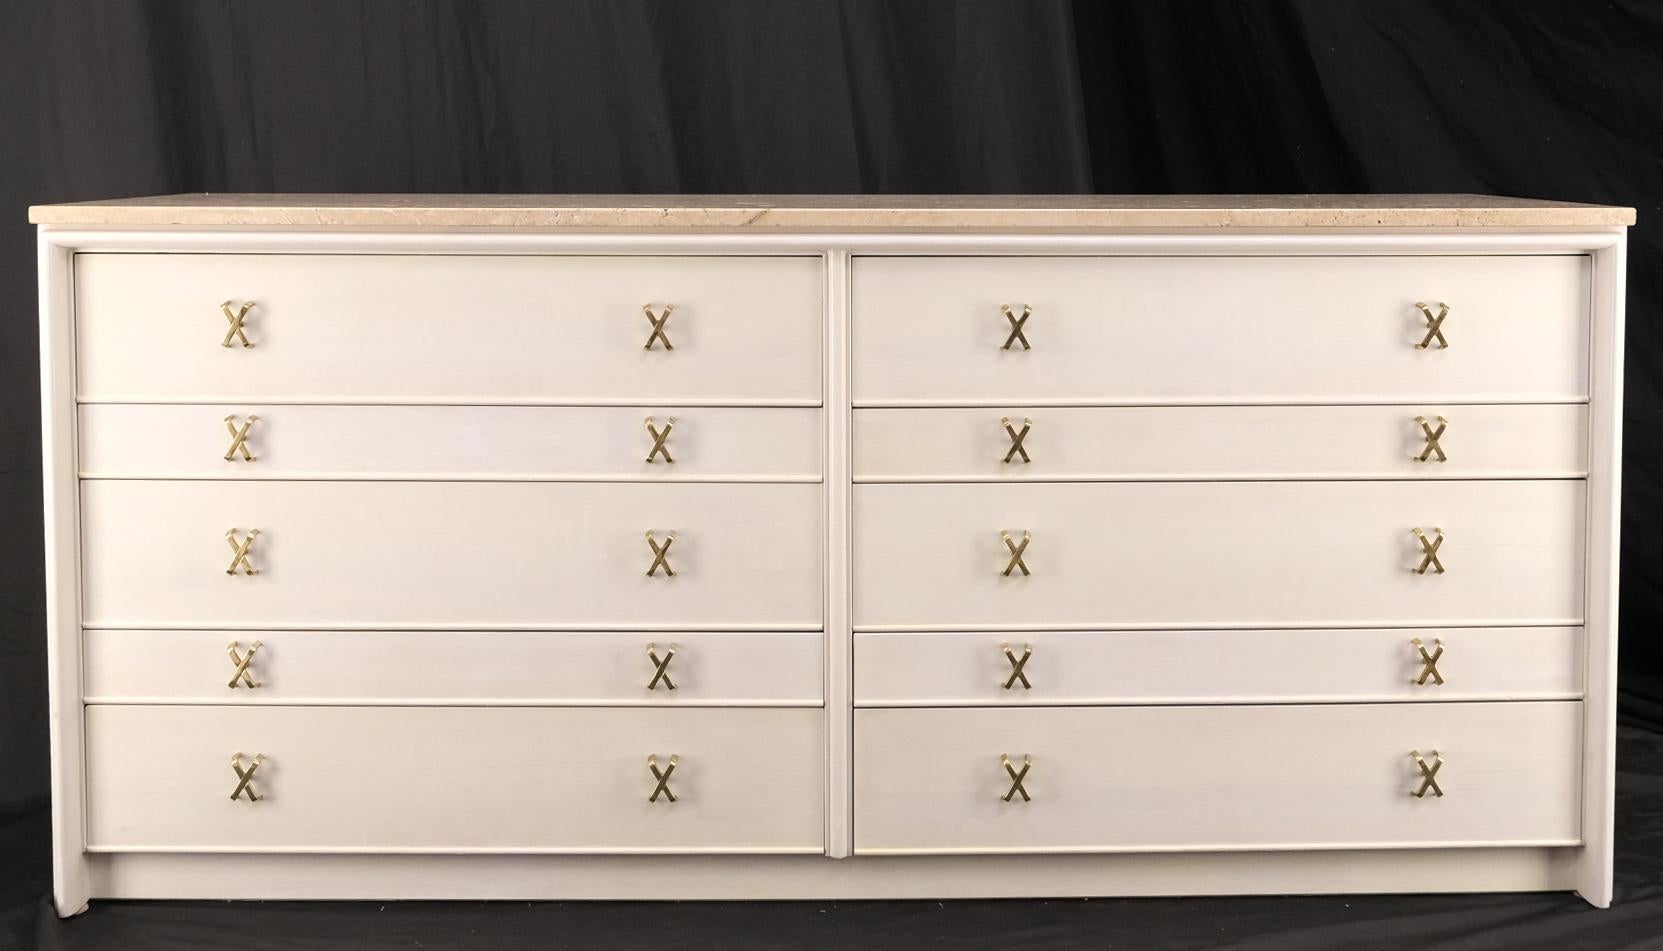 Paul Frankl for Johnson White Wash Marble Top 10 Drawers Dresser Brass x Pulls In Excellent Condition For Sale In Rockaway, NJ